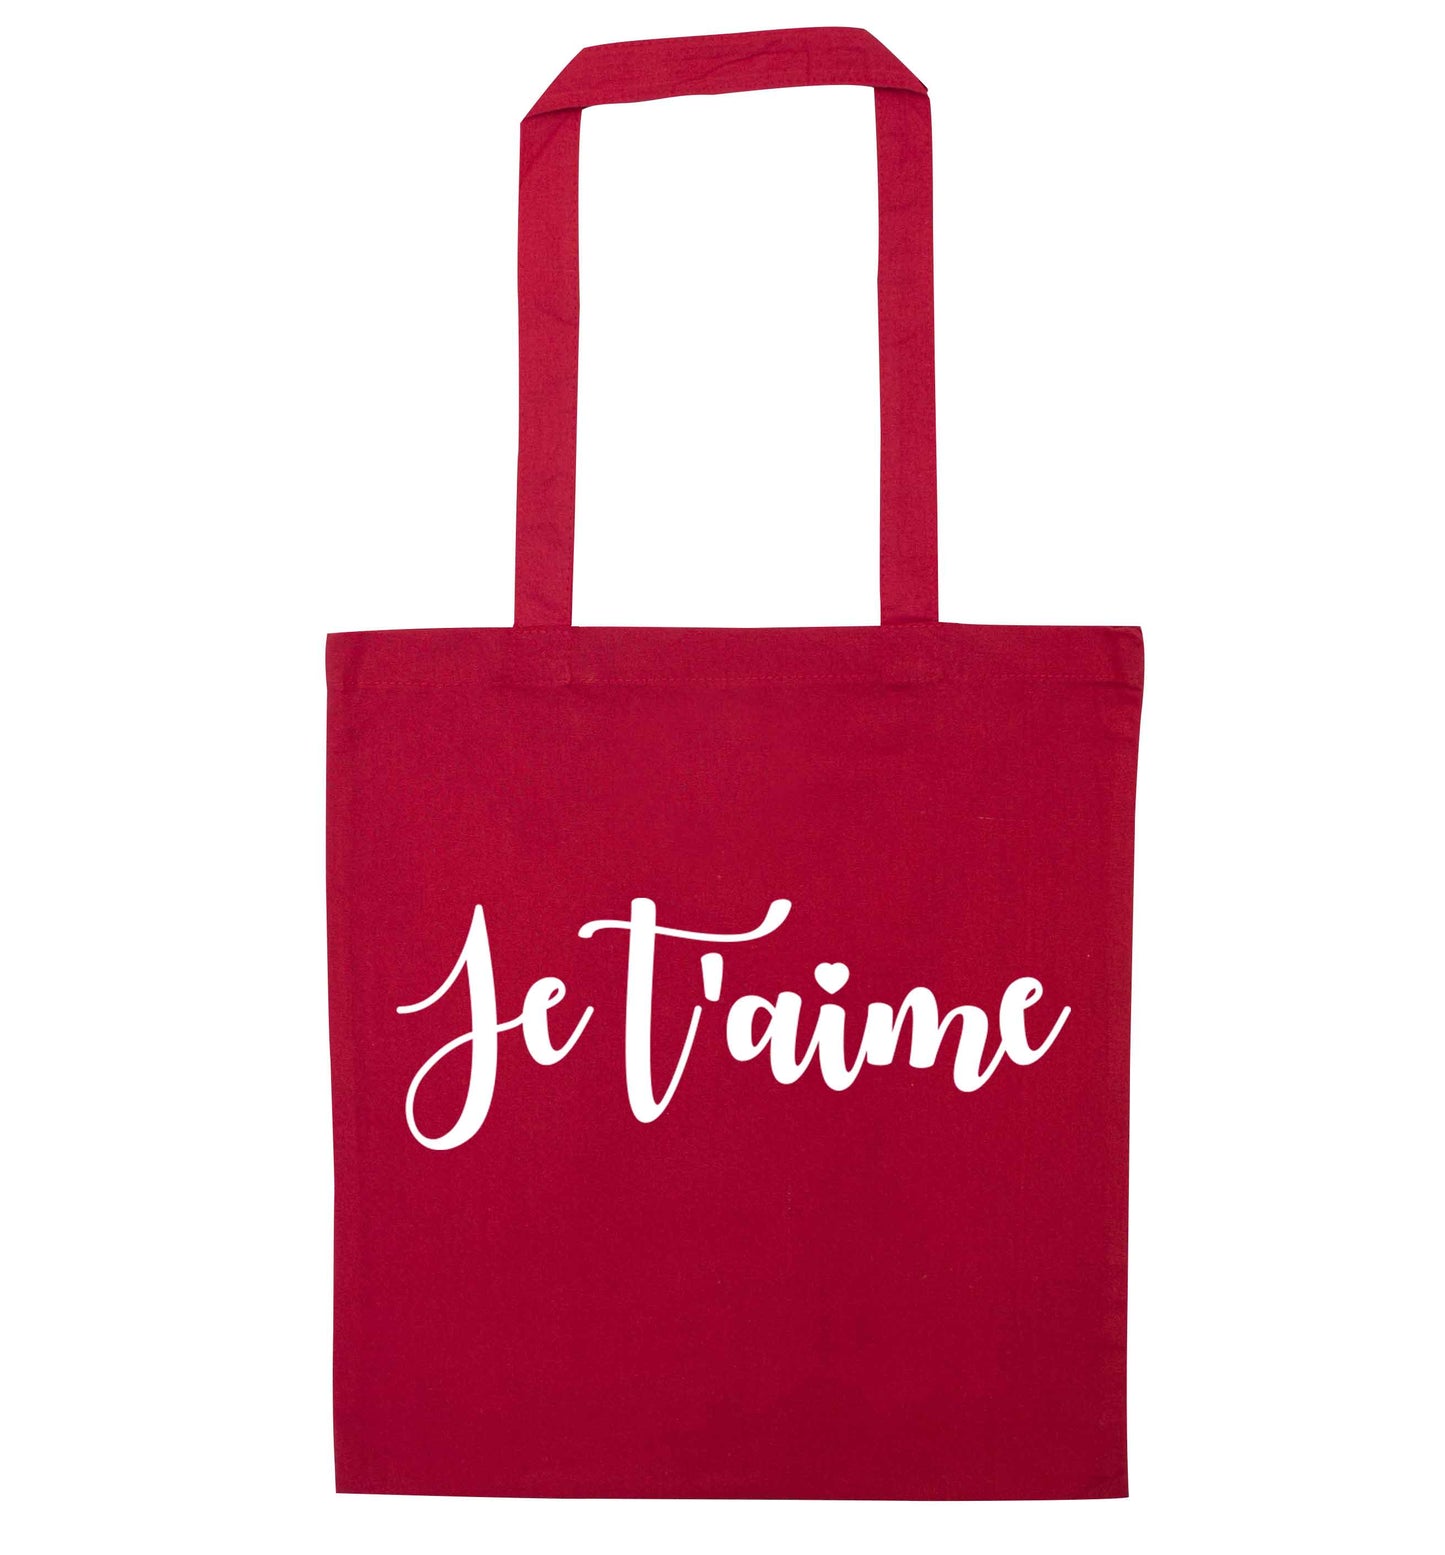 Je t'aime red tote bag